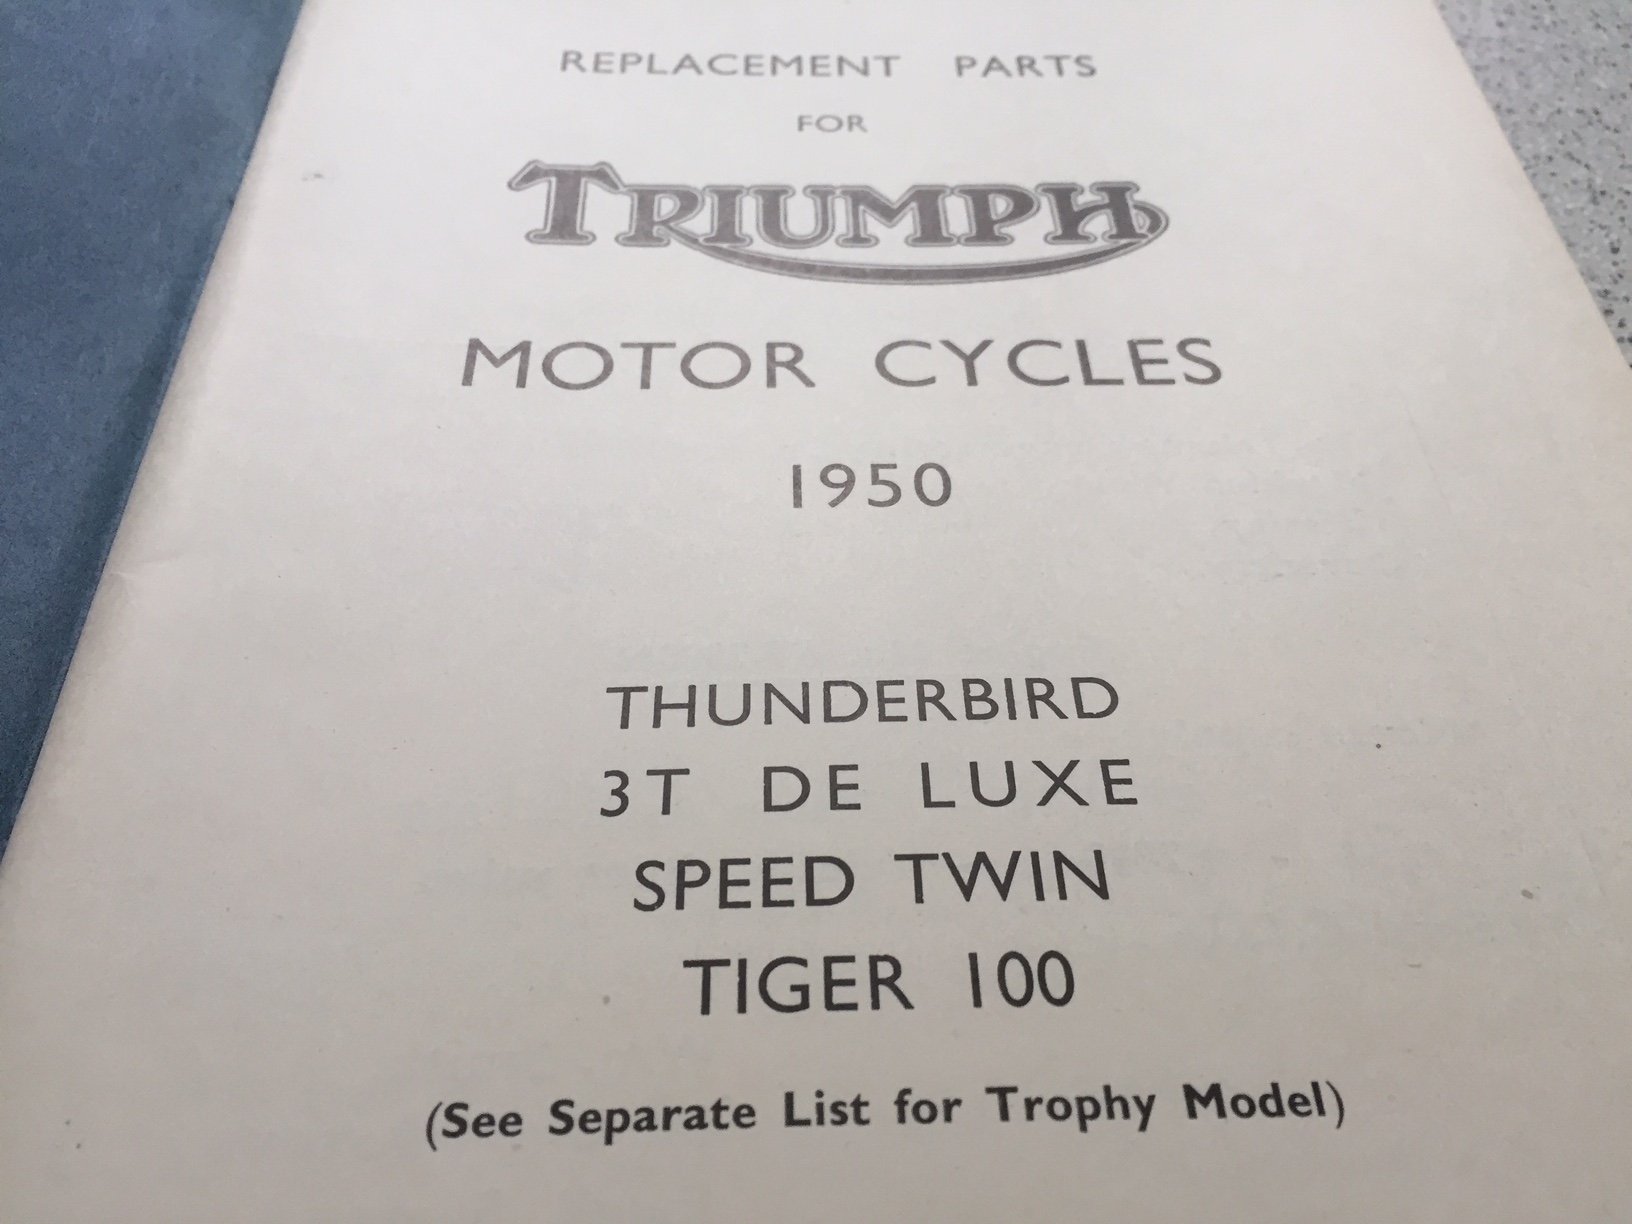 Triumph Replacement Parts for 1950 Models Thunderbird 3T Deluxe Speed Twin  Tiger 100 - The Timing Chest